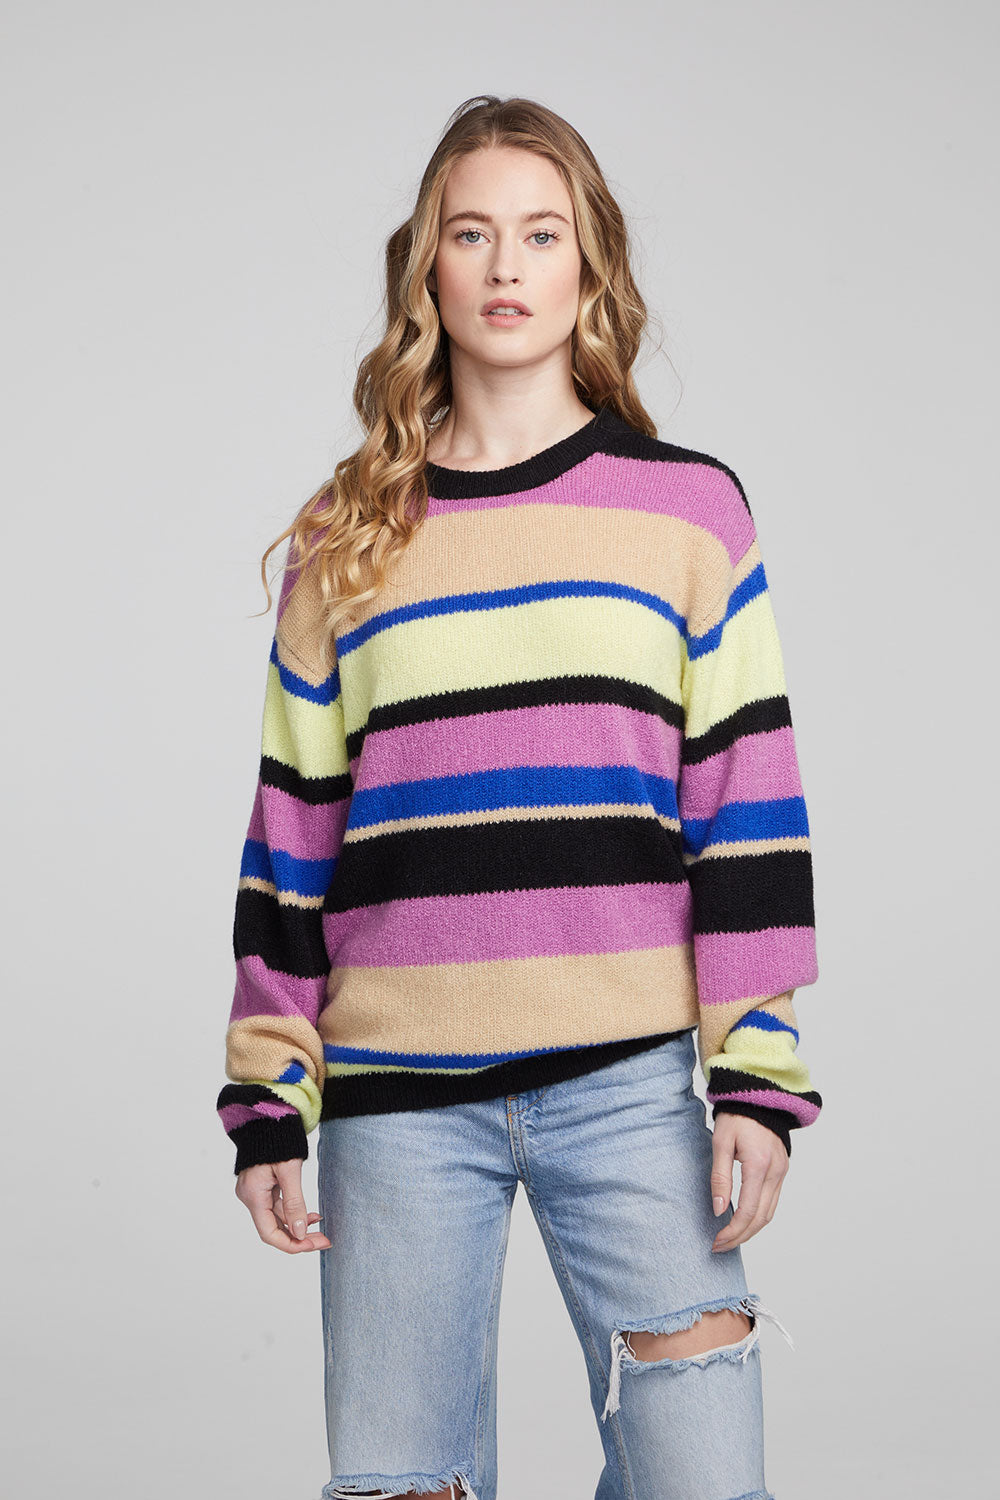 Frankie Foxy Lady Pullover WOMENS chaserbrand